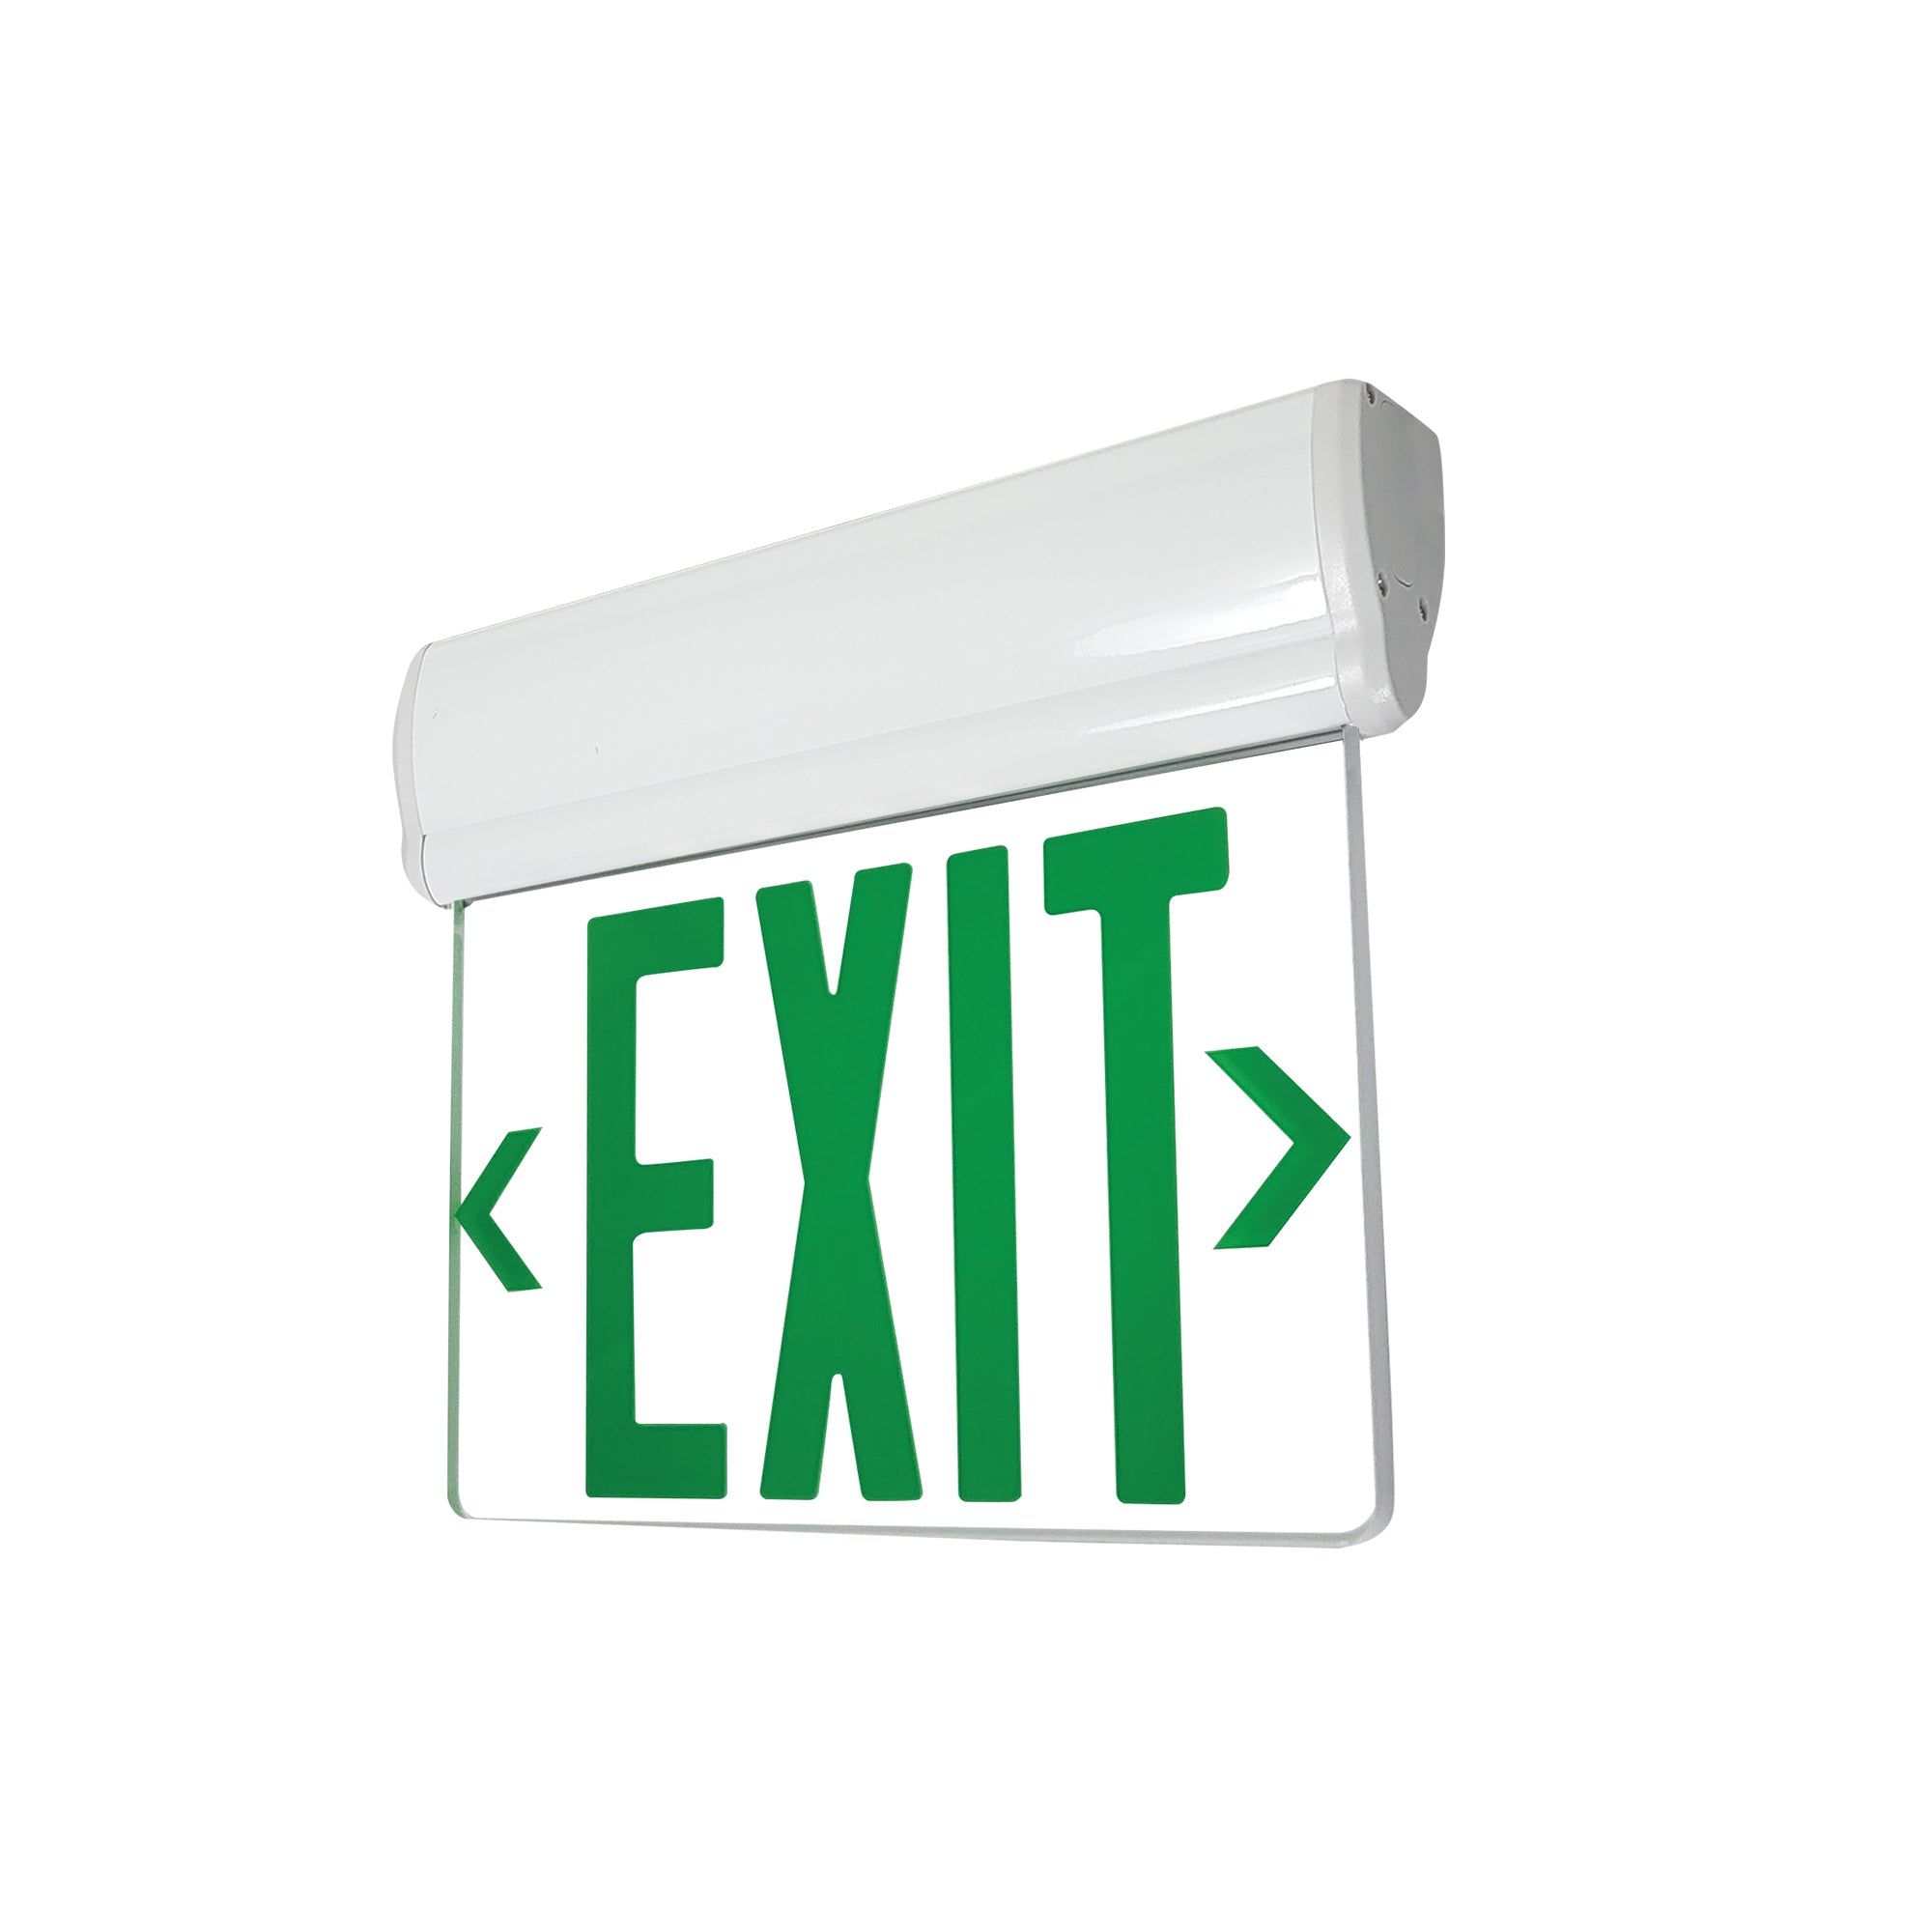 Nora Lighting NX-811-LEDGCW - Exit / Emergency - Surface Adjustable LED Edge-Lit Exit Sign, 2 Circuit, 6 Inch Green Letters, Single Face / Clear Acrylic, White Housing